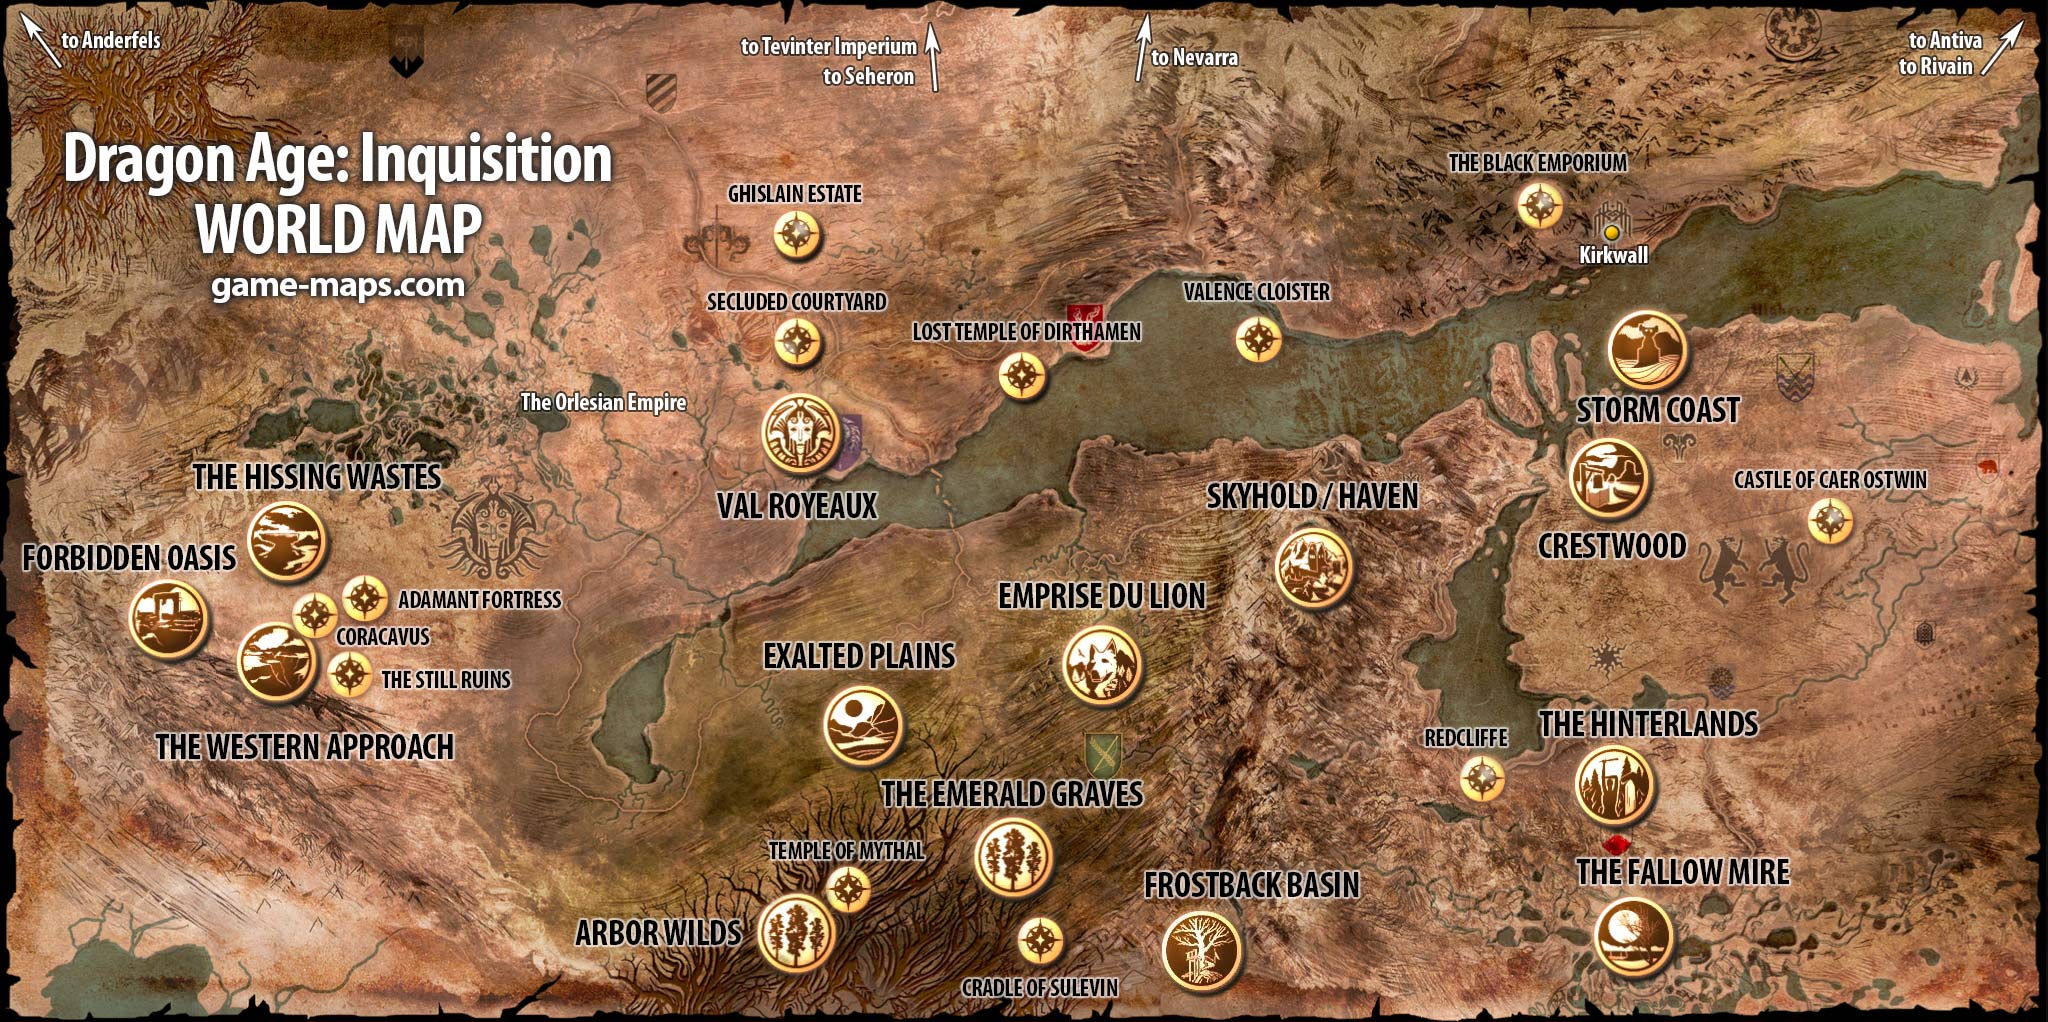 Dragon Age: Inquisition Walkthrough, Game Guide & Maps. | game-maps.com